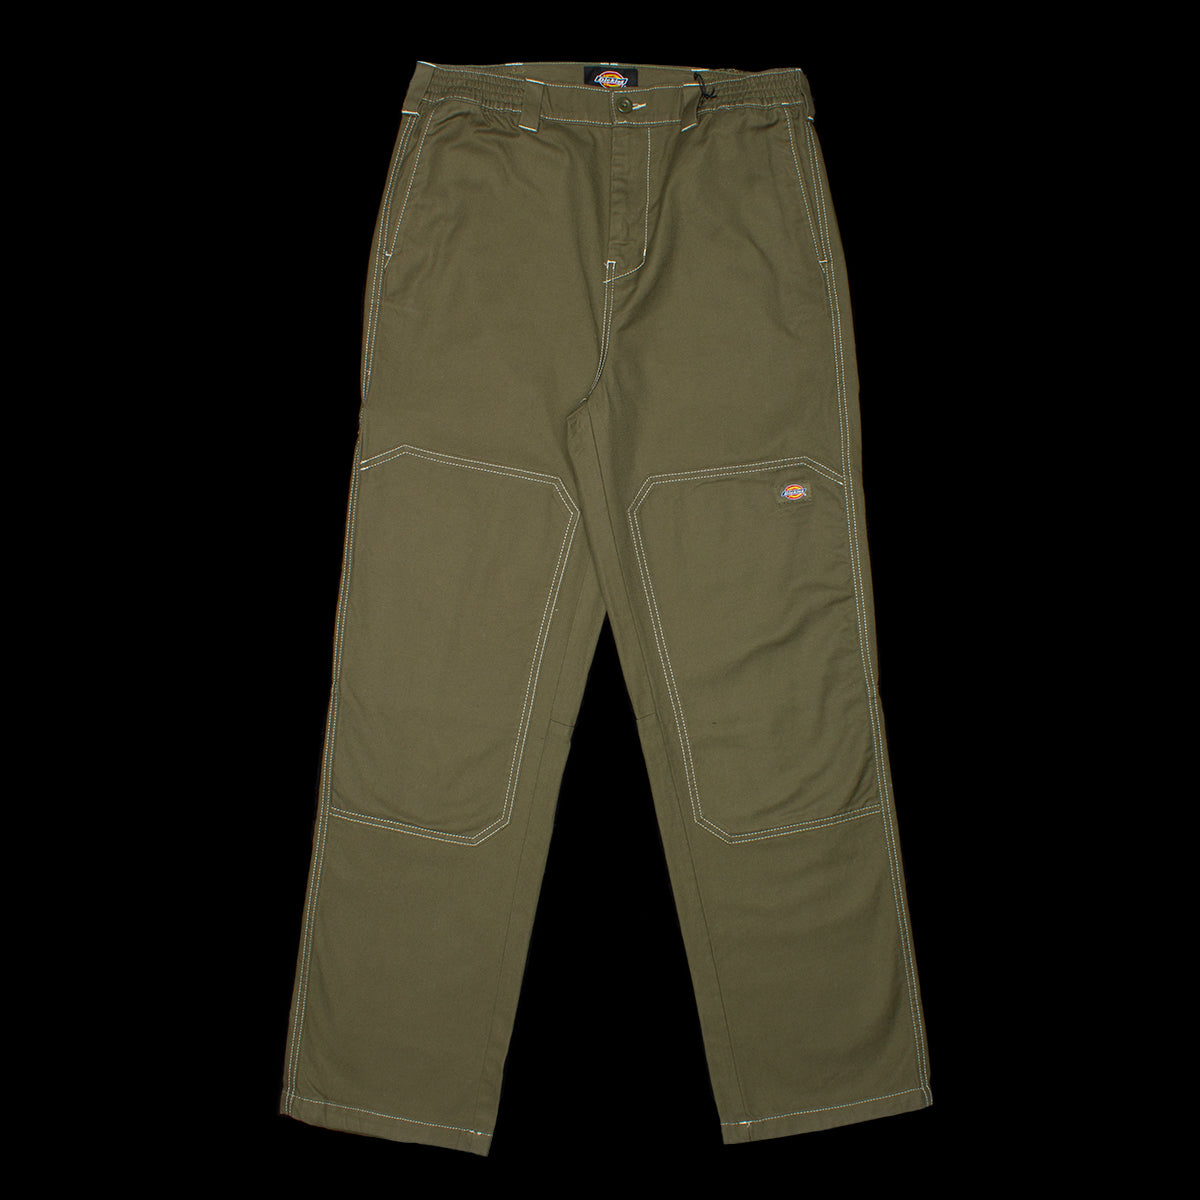 Florala Relaxed Fit Double Knee Pants - Dickies US